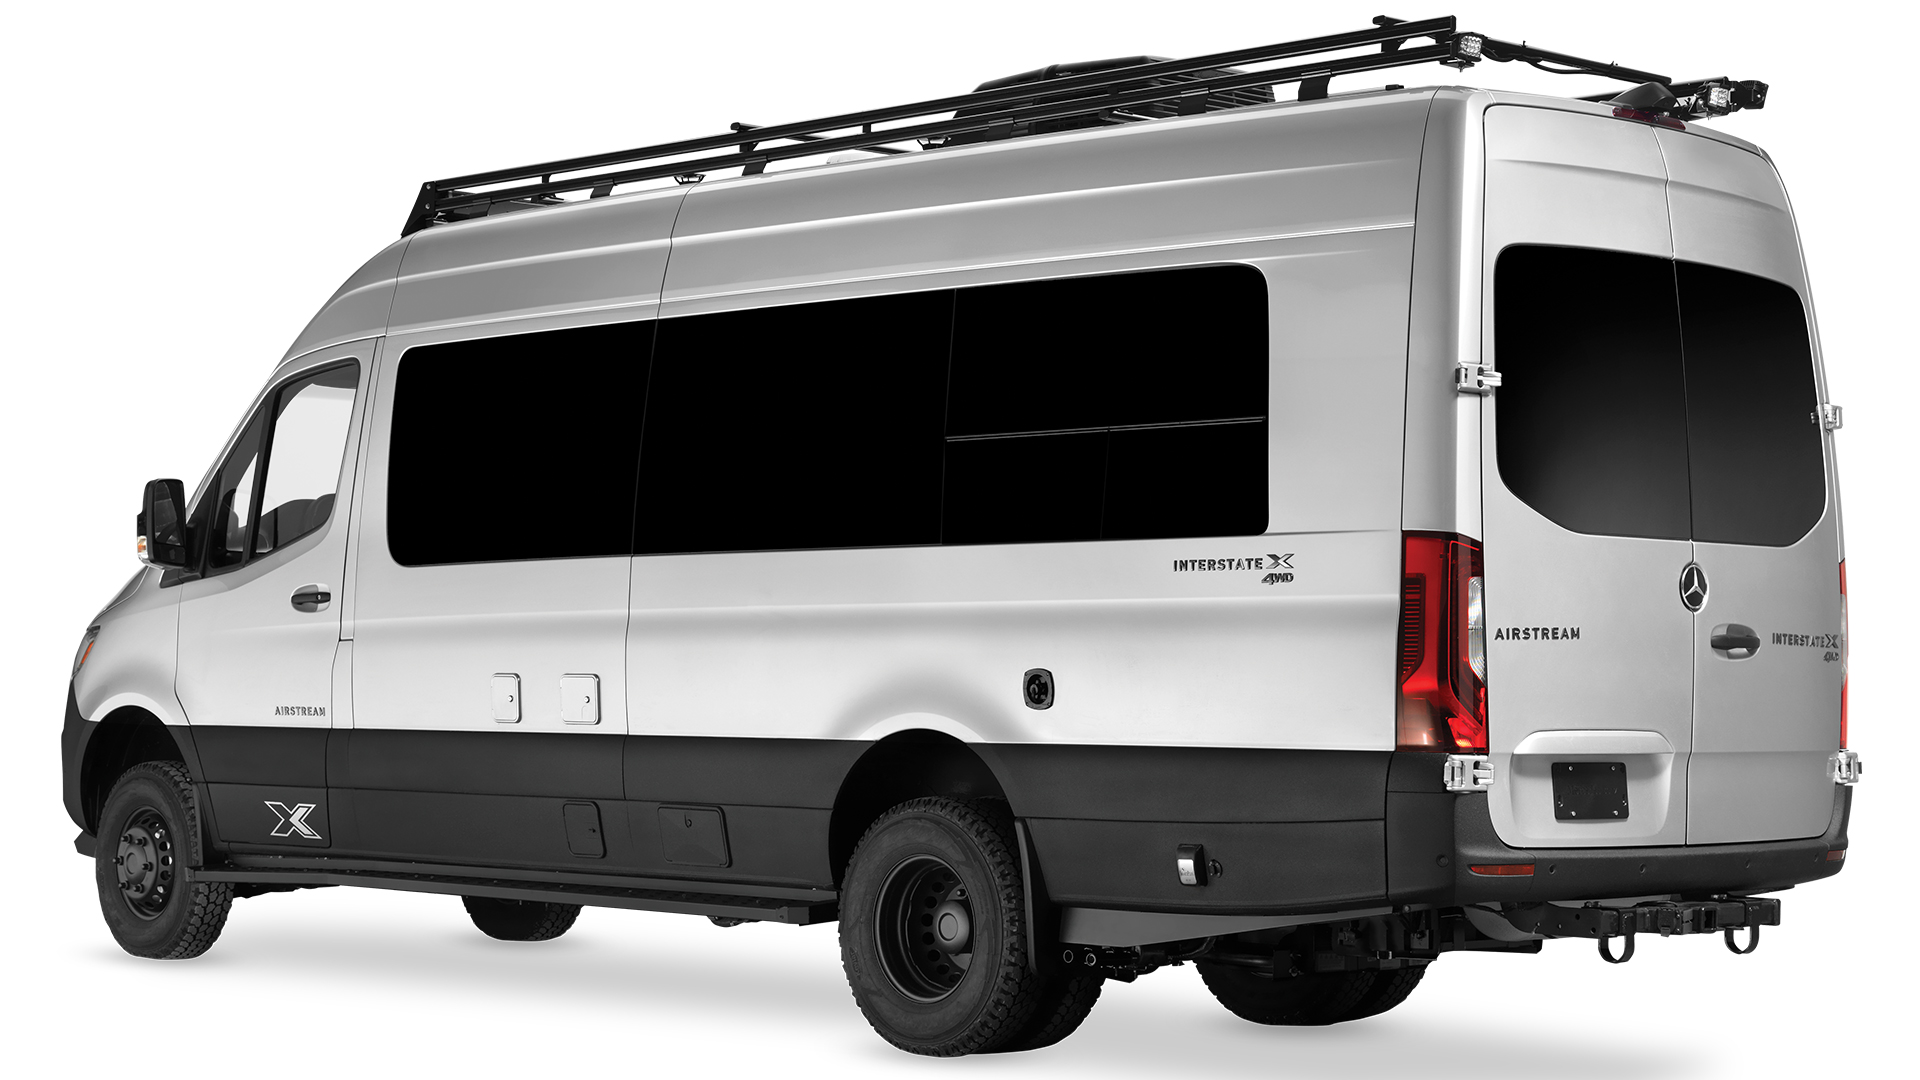 Airstream-Interstate-24X-Exterior-Rear-Angle